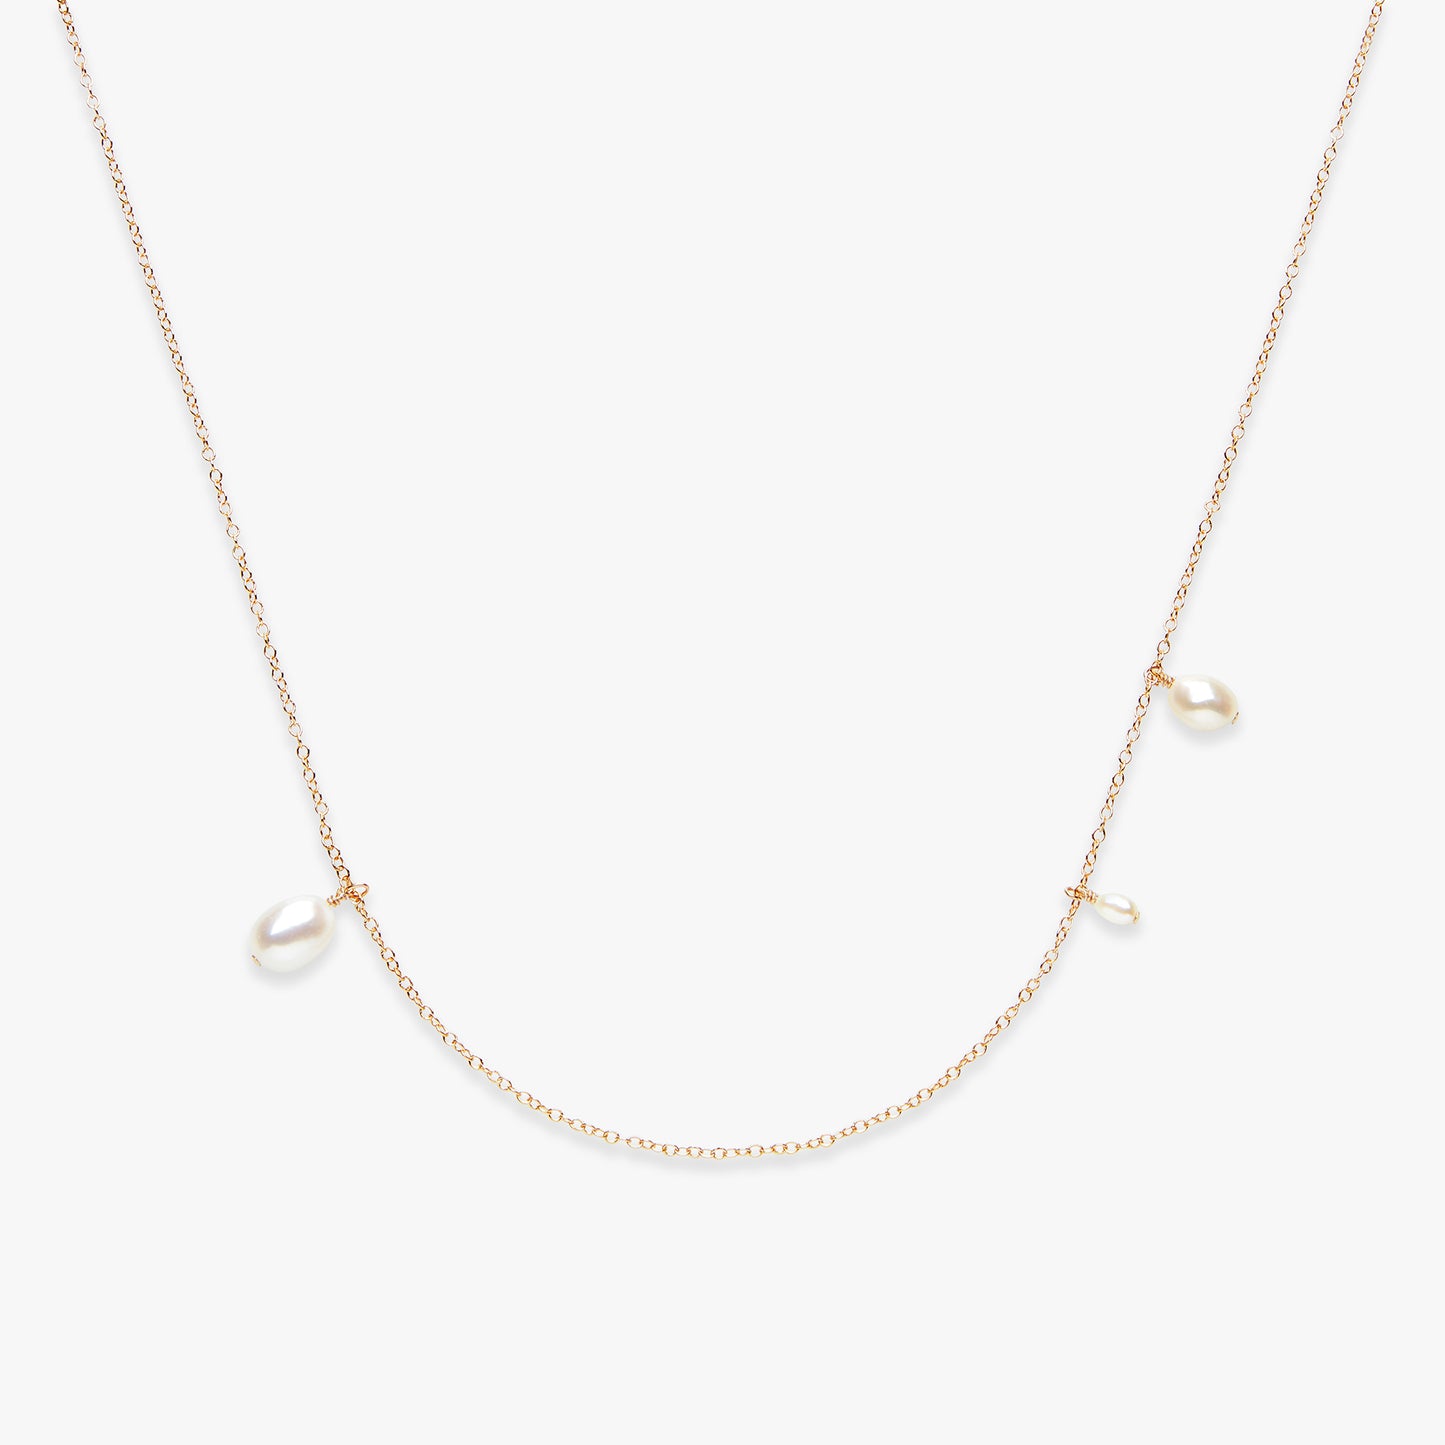 Asymmetric Pearl ketting gold filled